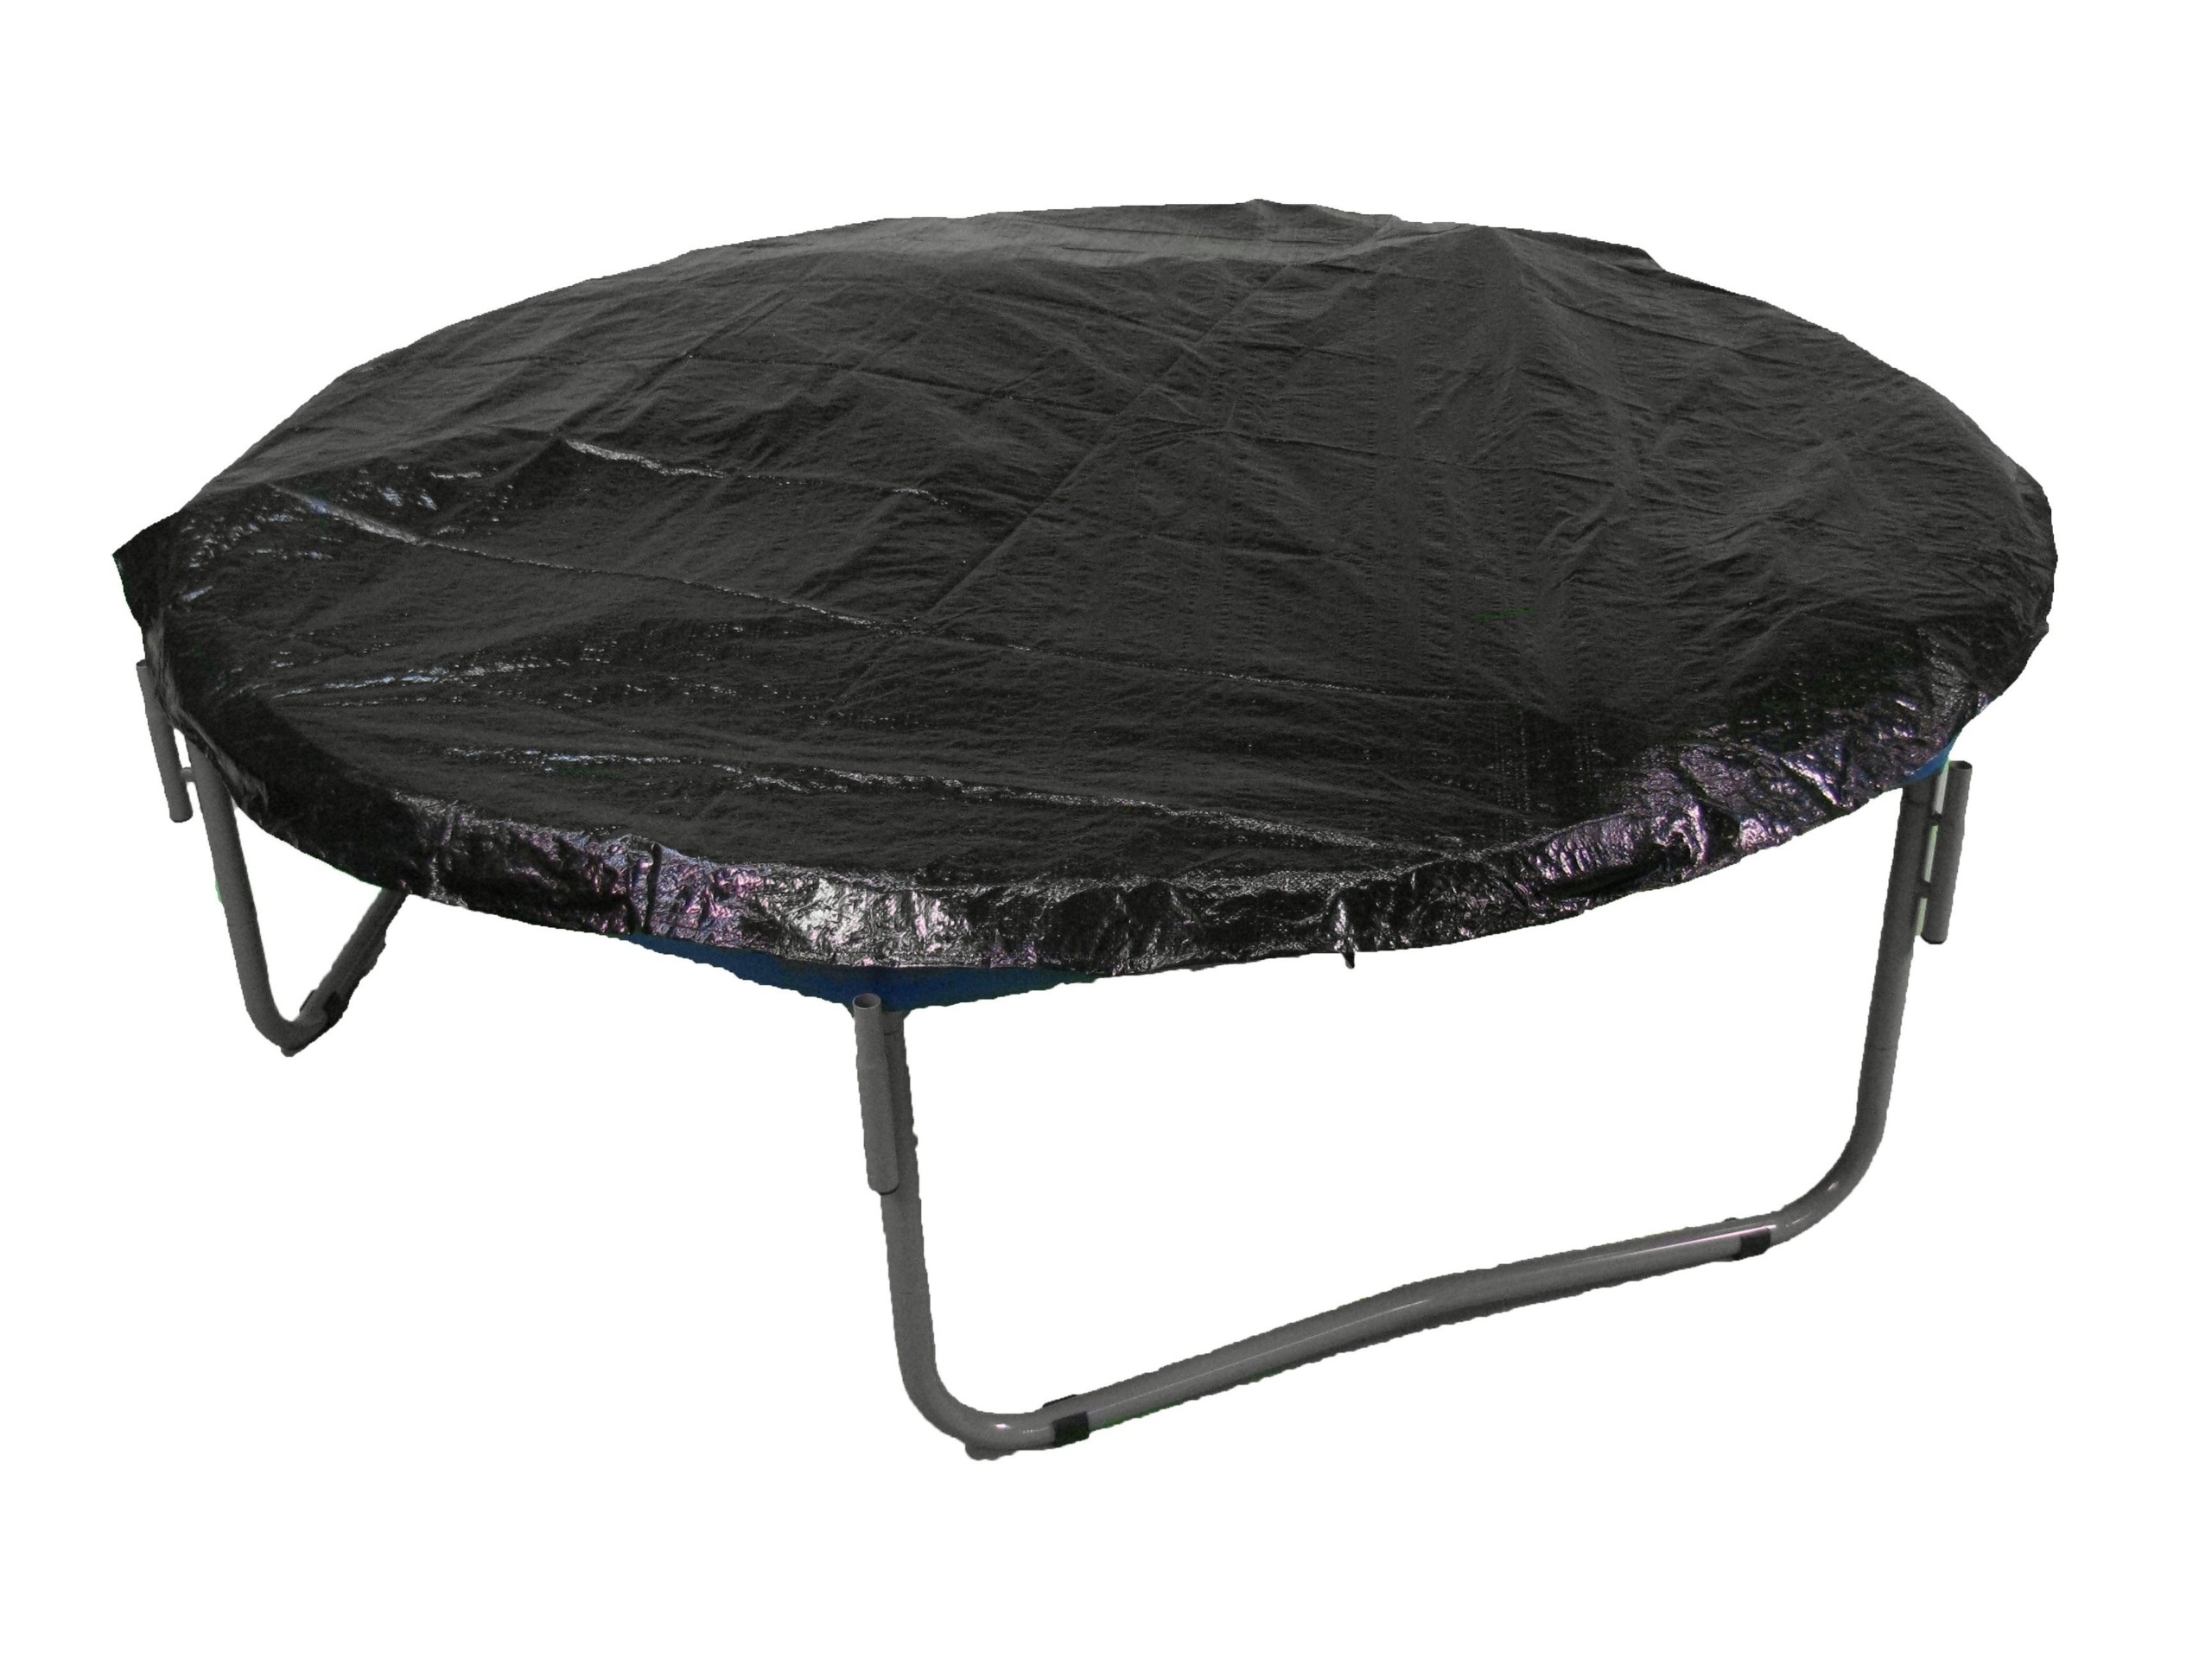 Upper Bounce Black Color 14' Trampoline Weather Protective Cover Frame Rain Shield Protection Fits 14FT Round Trampoline Frames